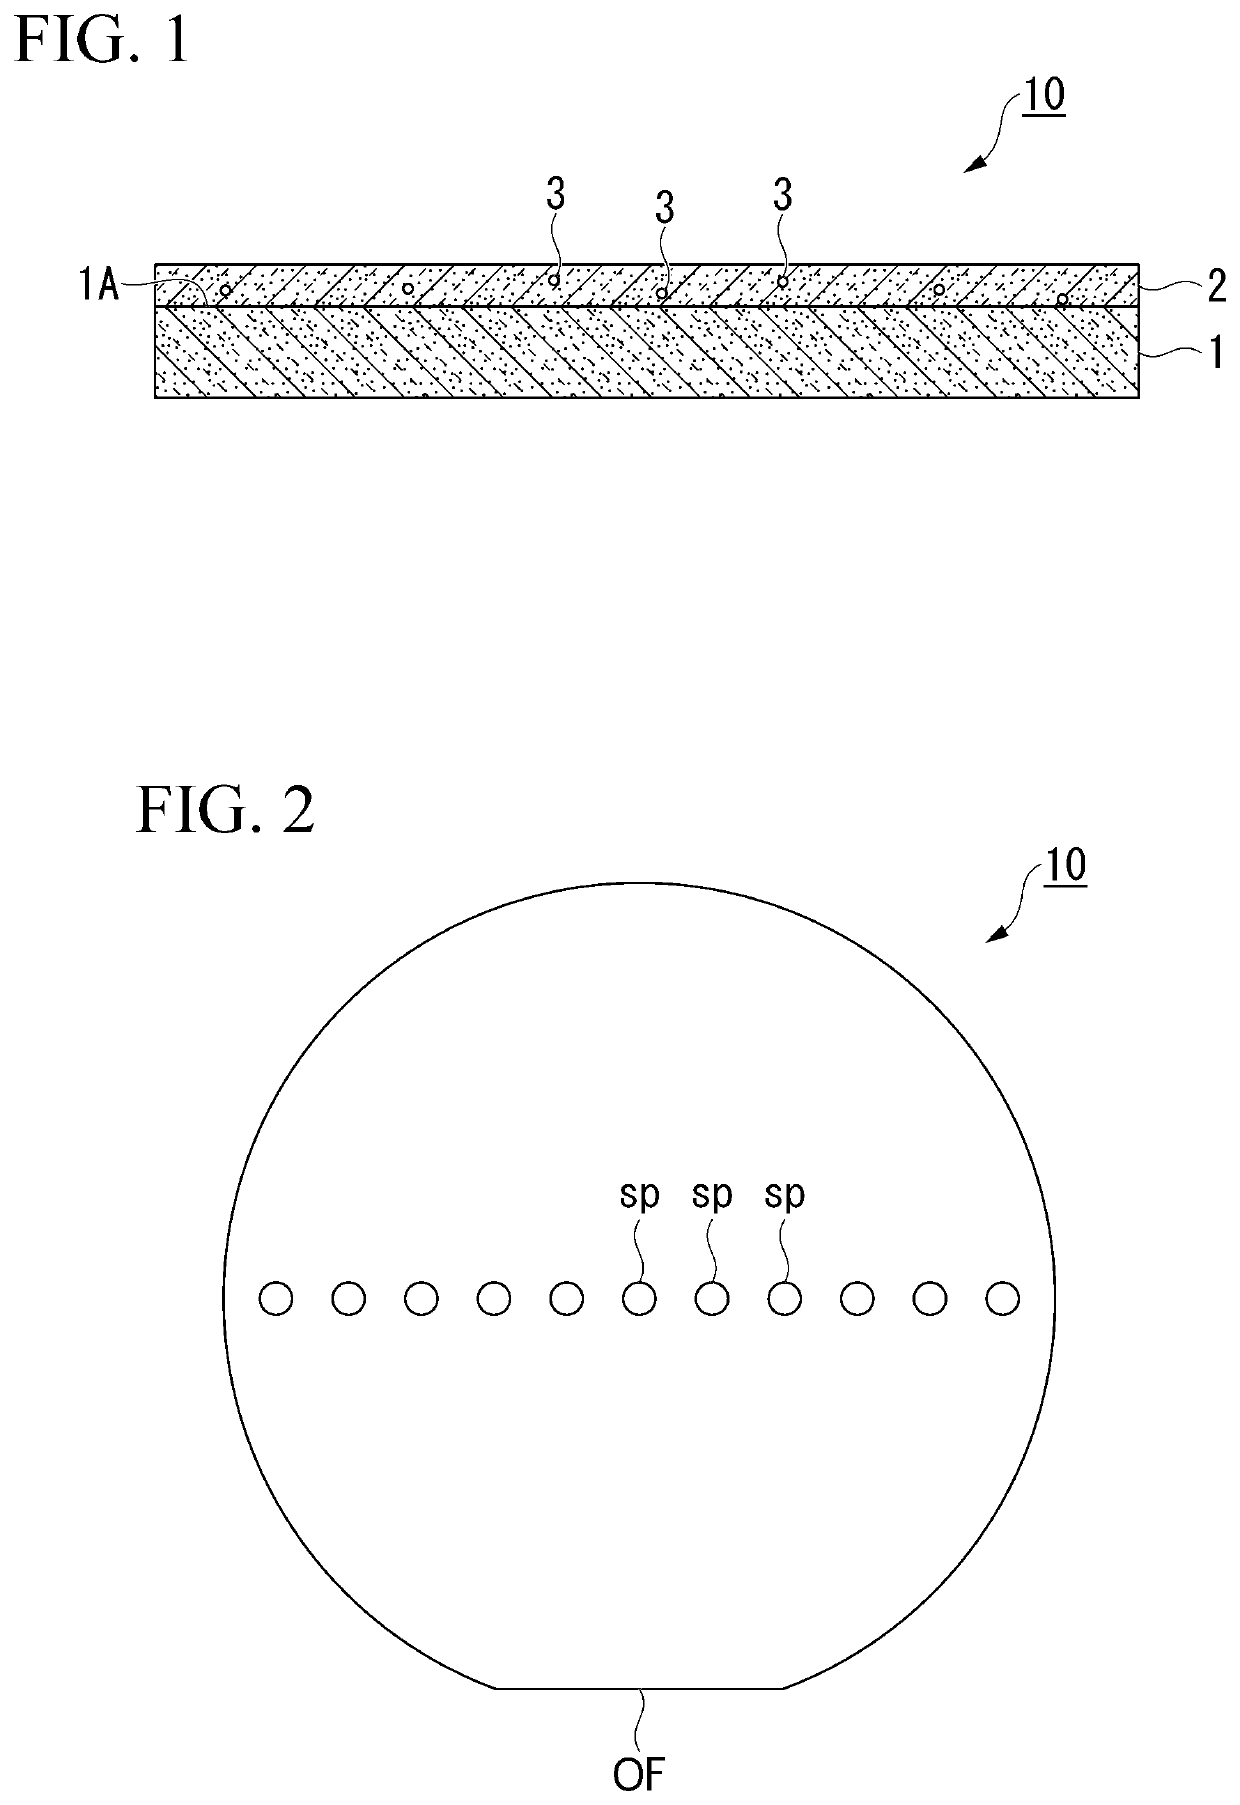 SiC EPITAXIAL WAFER AND METHOD FOR PRODUCING SiC EPITAXIAL WAFER